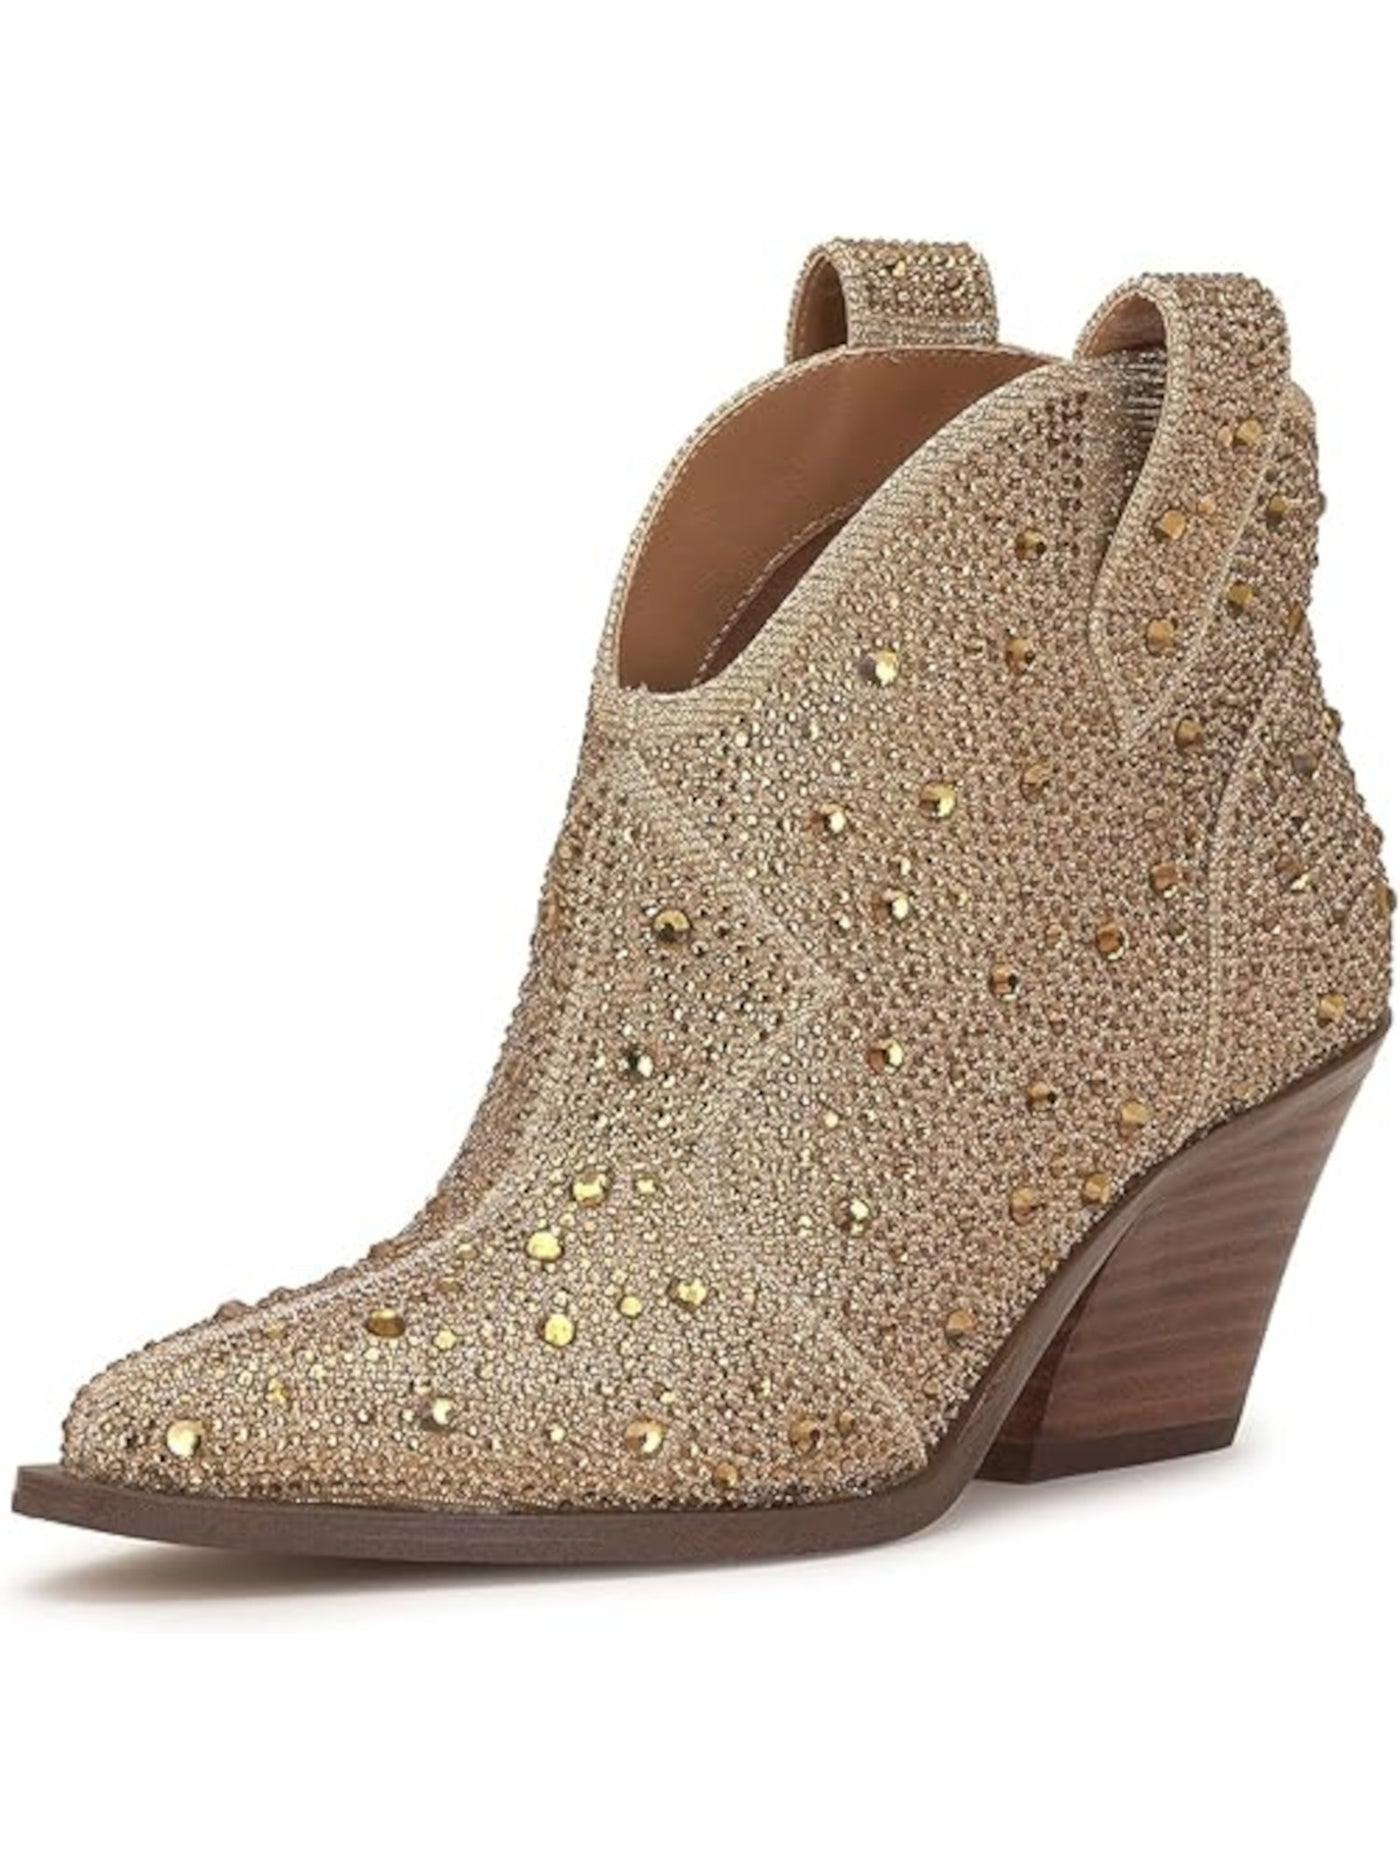 JESSICA SIMPSON Womens Gold Front Notch Embellished Zadie Pointed Toe Stacked Heel Slip On Western Boot 7.5 M